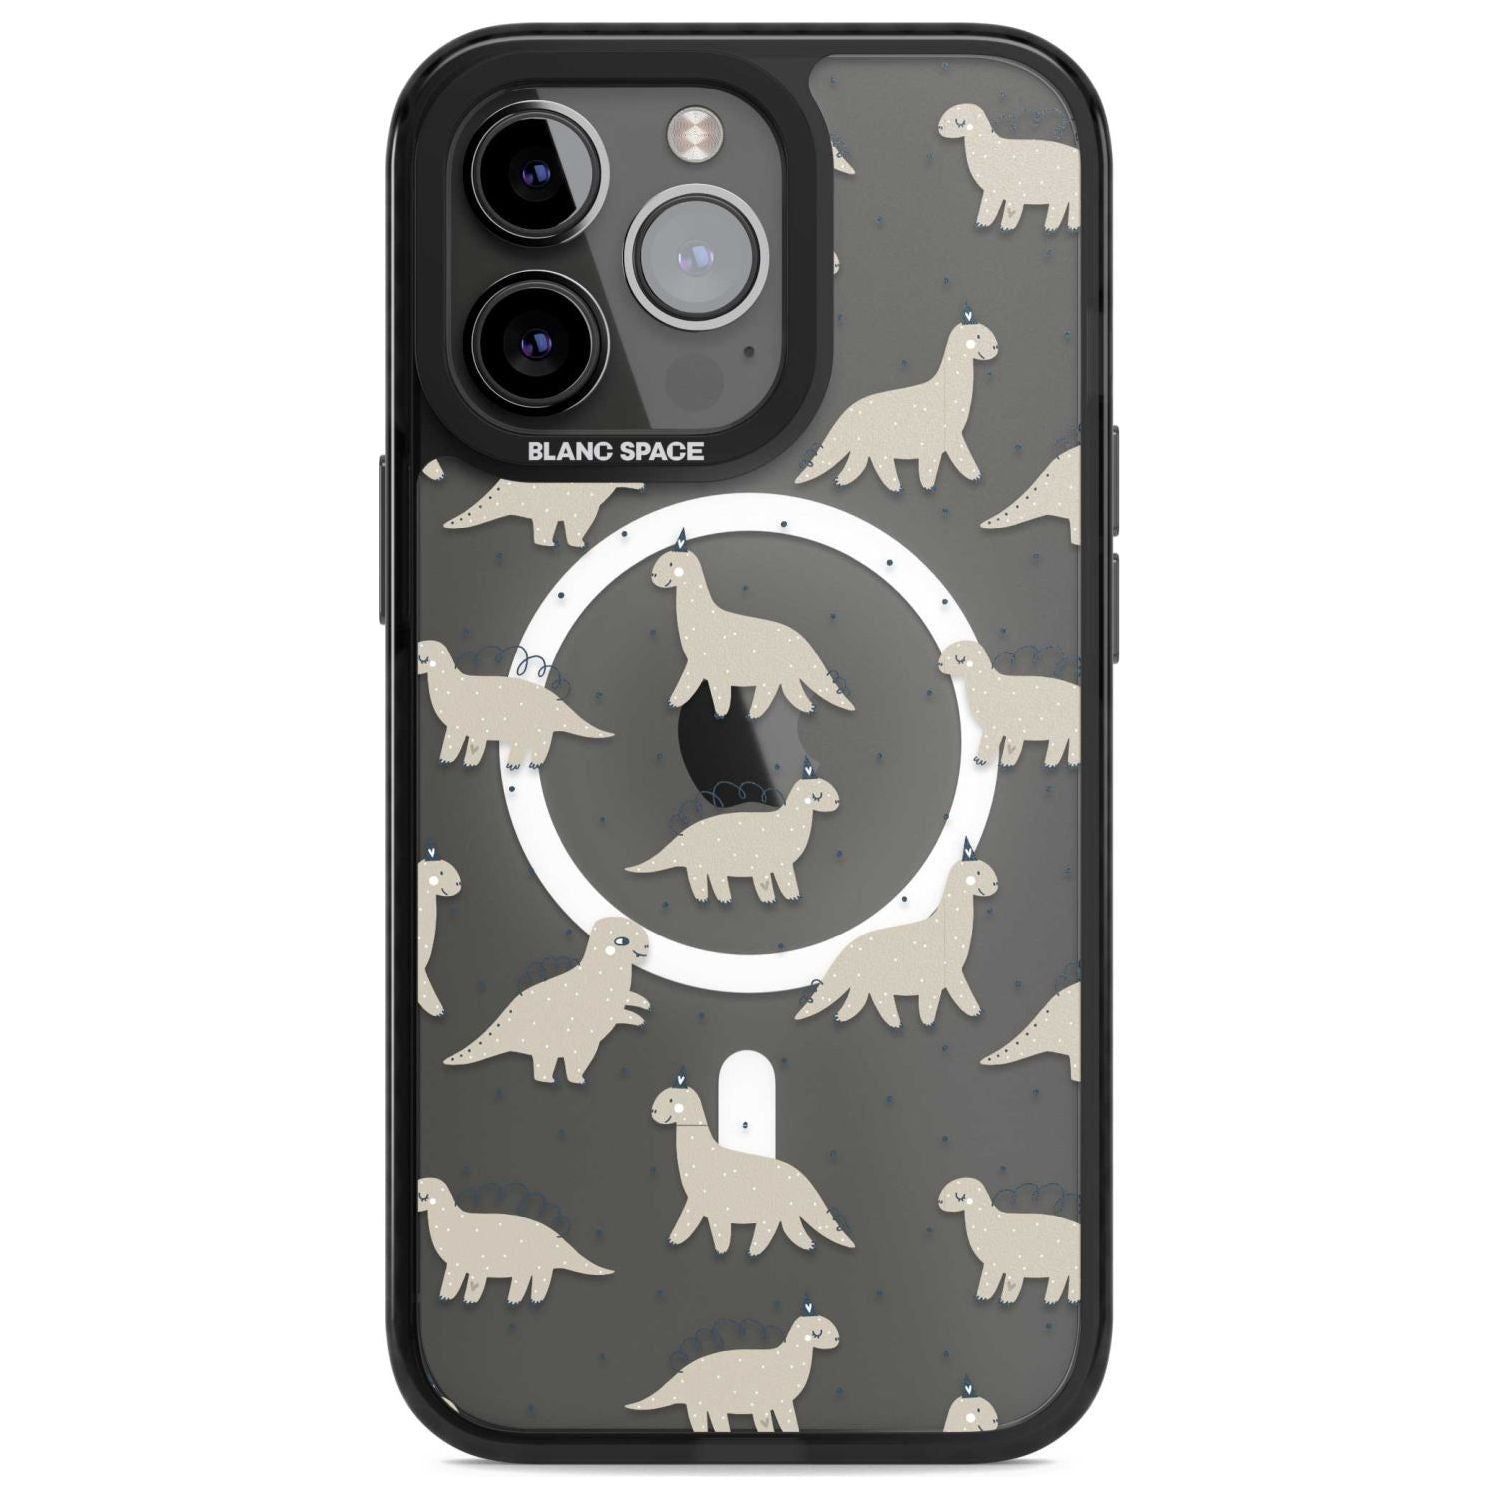 Adorable Dinosaurs Pattern (Clear) Phone Case iPhone 15 Pro Max / Magsafe Black Impact Case,iPhone 15 Pro / Magsafe Black Impact Case,iPhone 14 Pro Max / Magsafe Black Impact Case,iPhone 14 Pro / Magsafe Black Impact Case,iPhone 13 Pro / Magsafe Black Impact Case Blanc Space